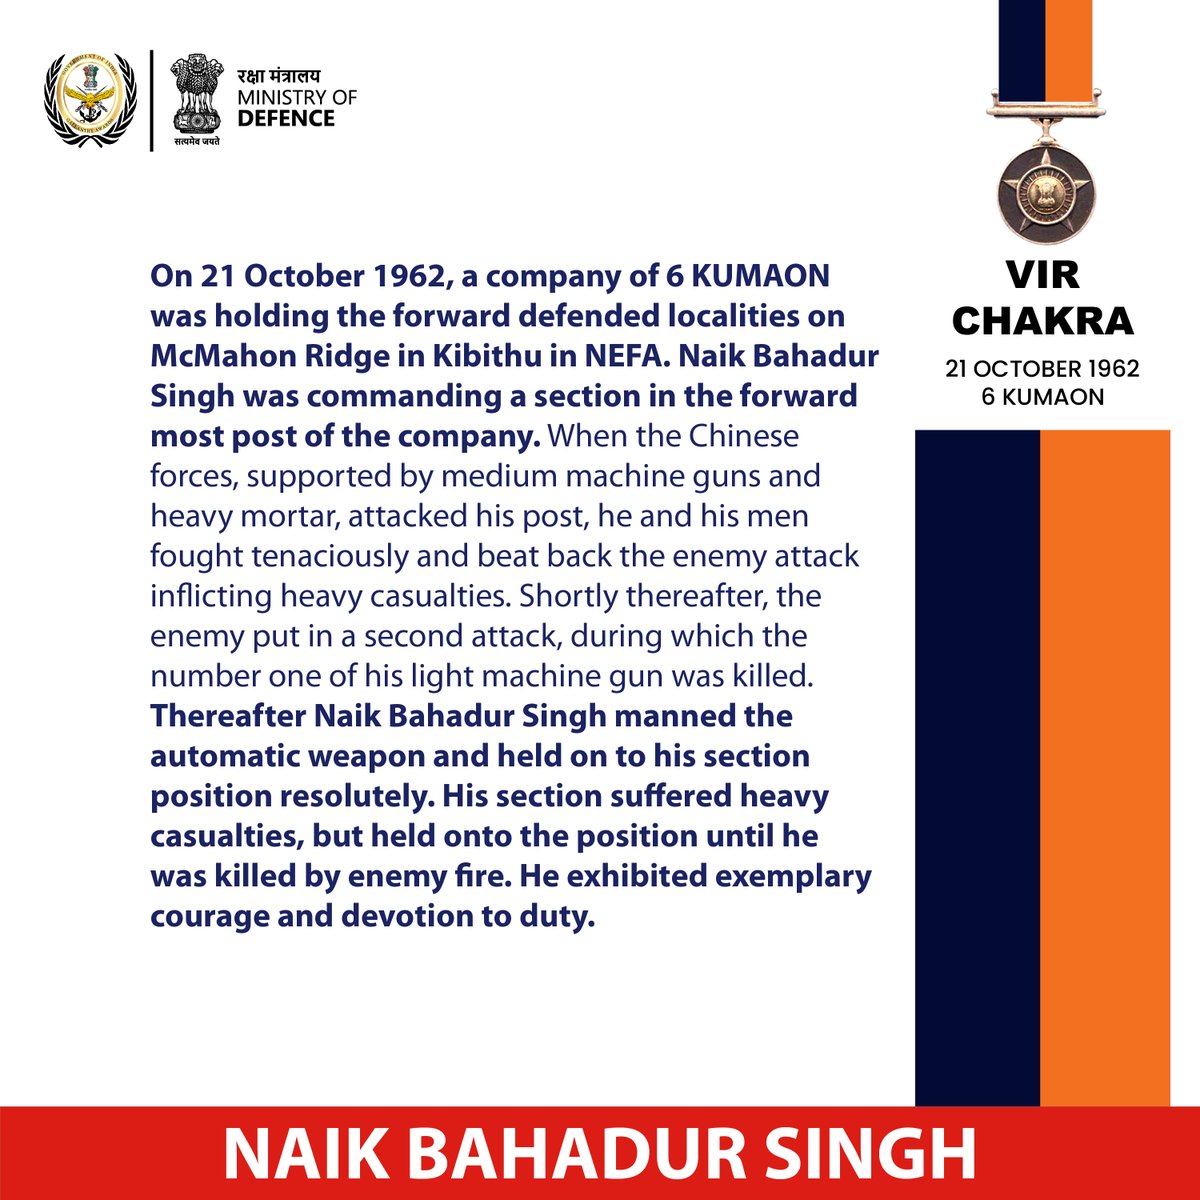 On 21 October 1962, Naik Bahadur Singh was commanding a section in Kibhitu in NEFA. During the Chinese attacks, he fought courageously and held onto the position until he was killed. For his devotion to duty, he was awarded #VirChakra posthumously.